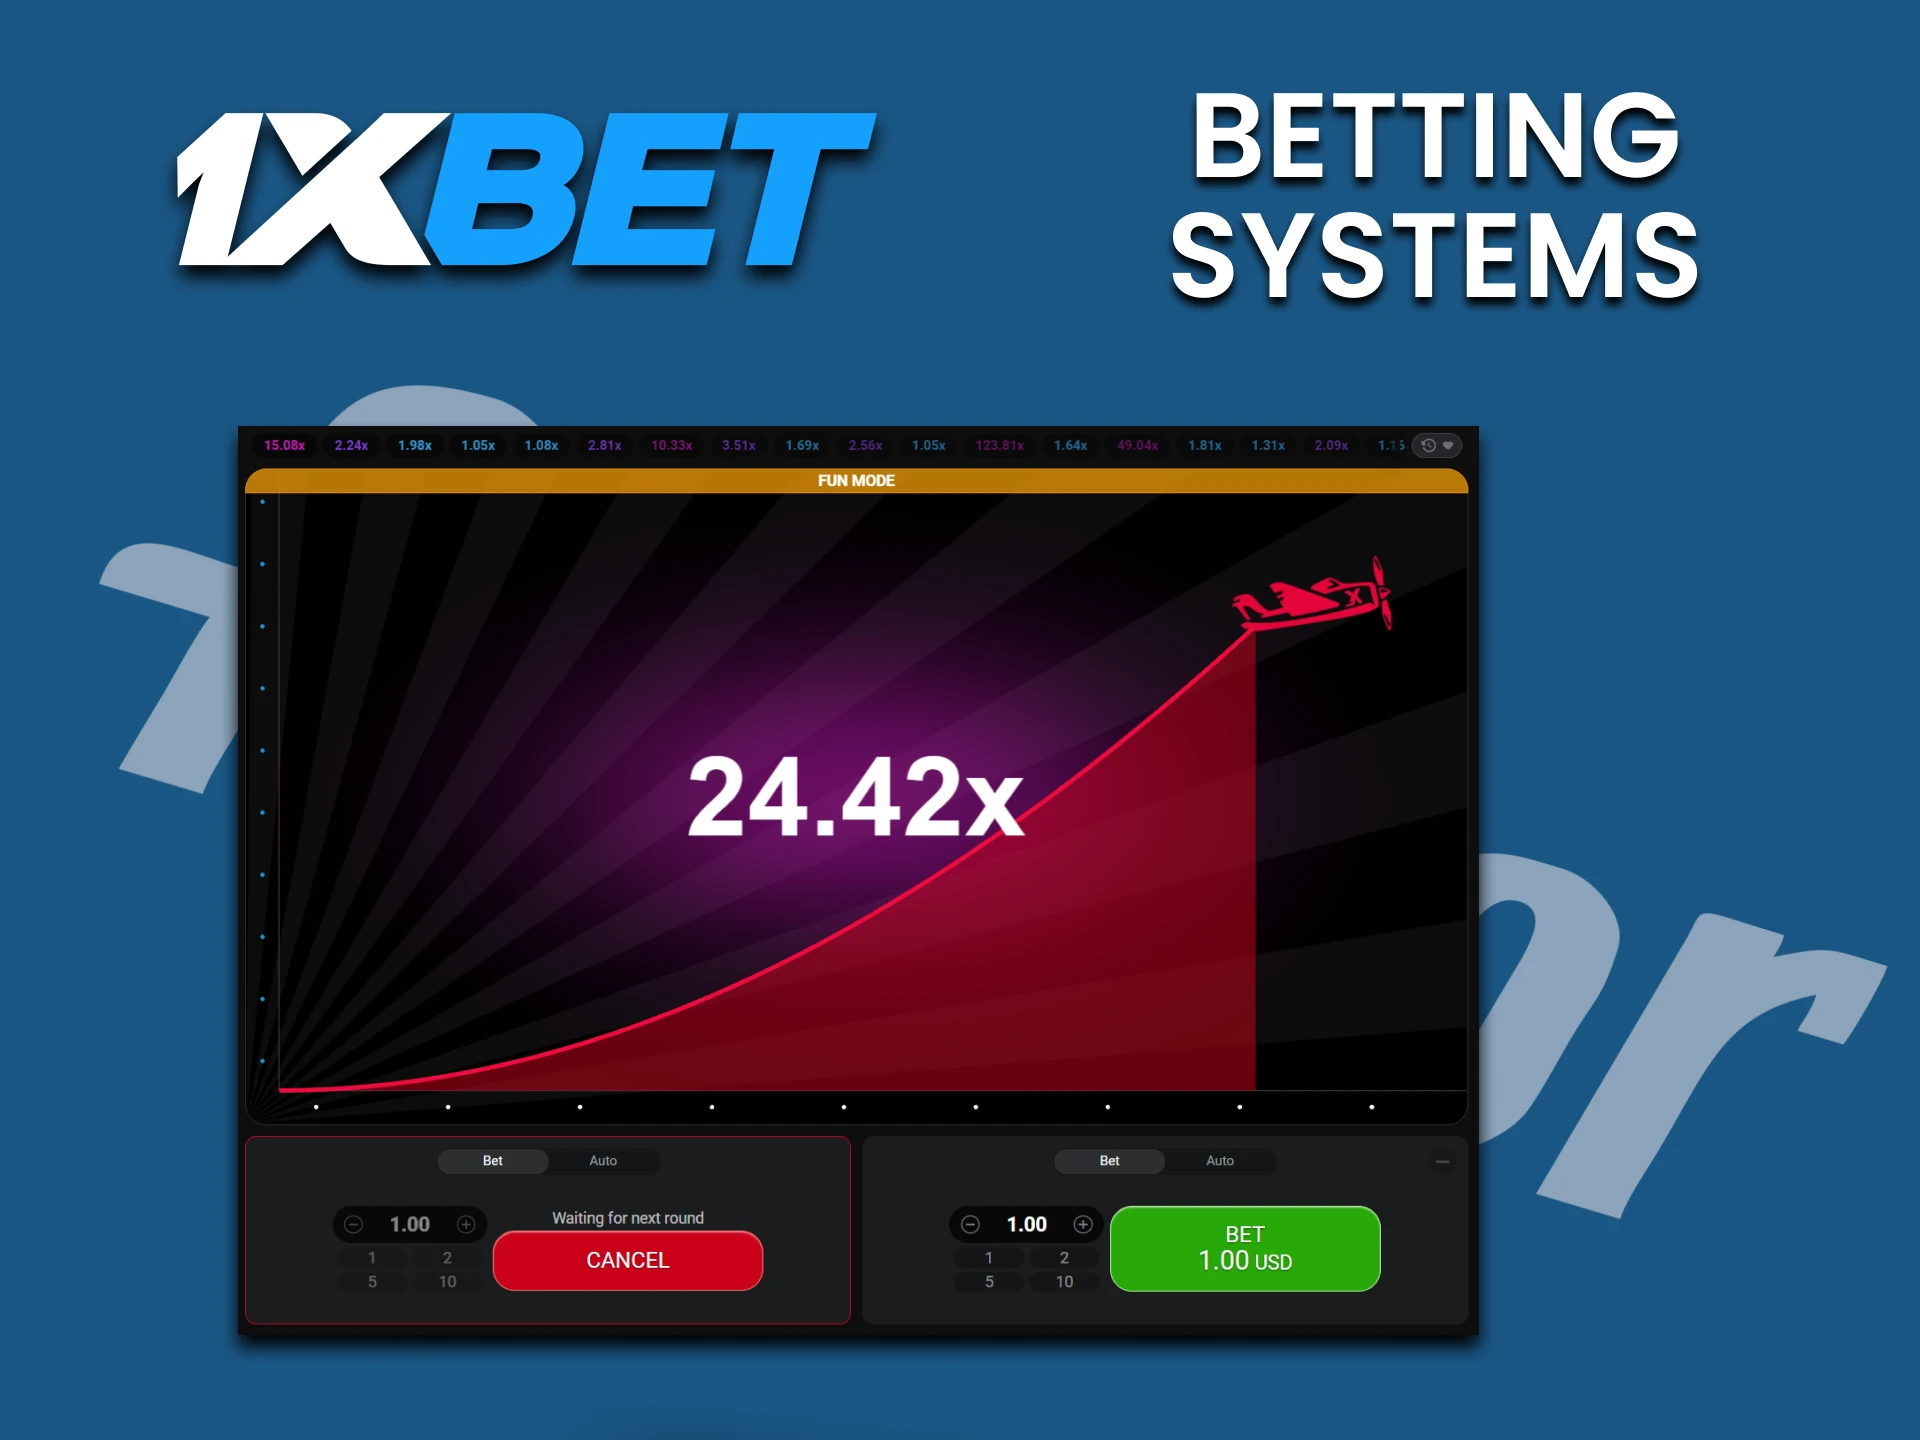 We will tell you about the betting system in the Aviator game on 1xbet.